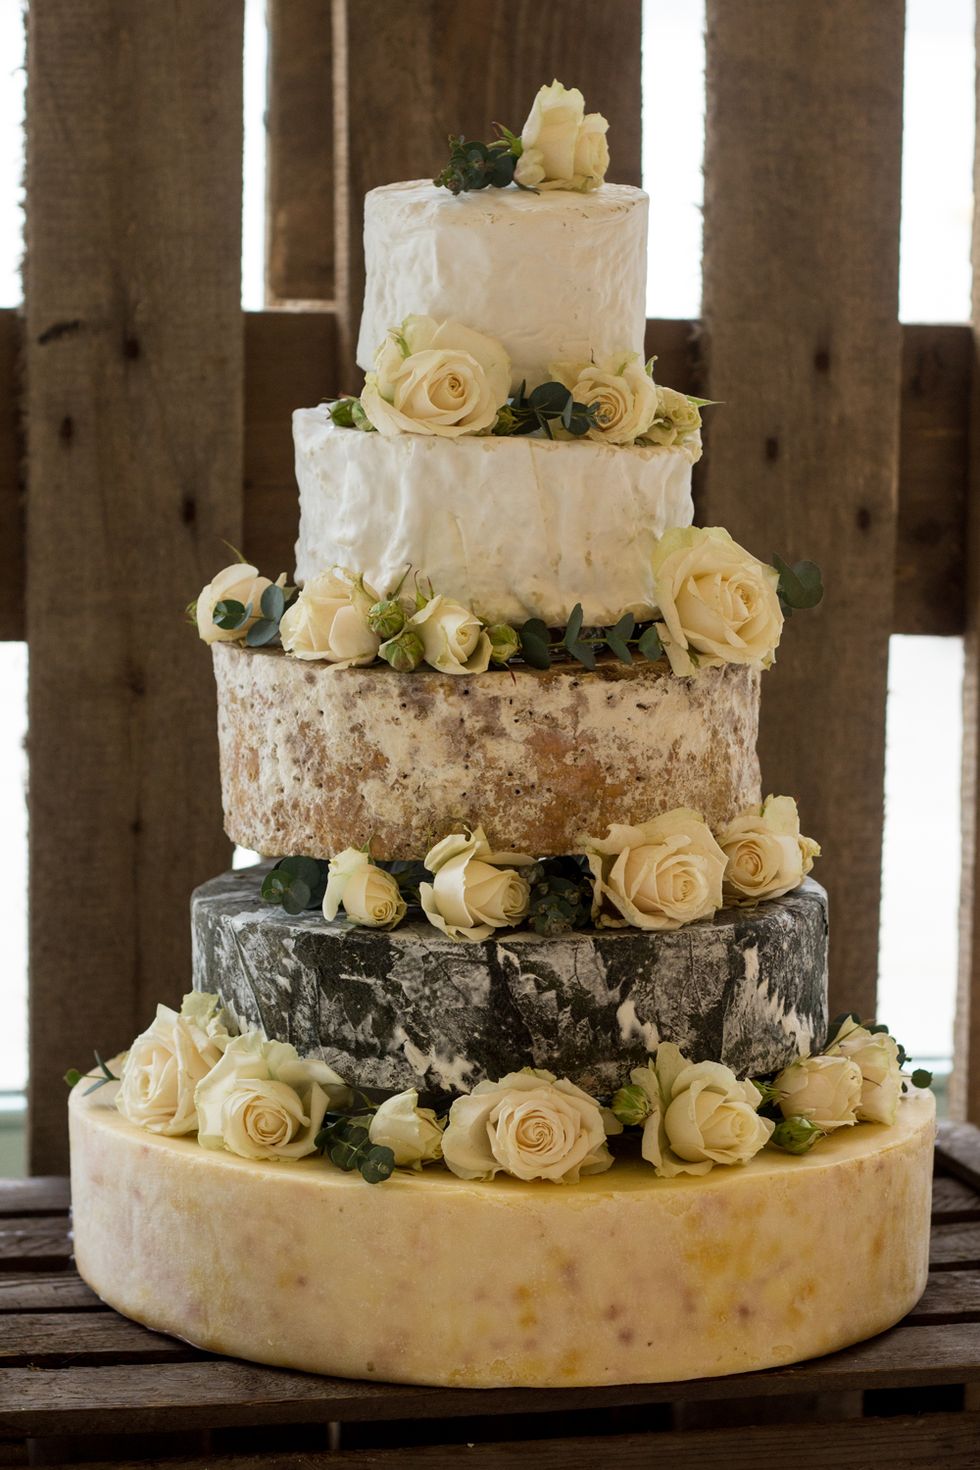 Cheese Wedding Cake from The Fine Cheese Co